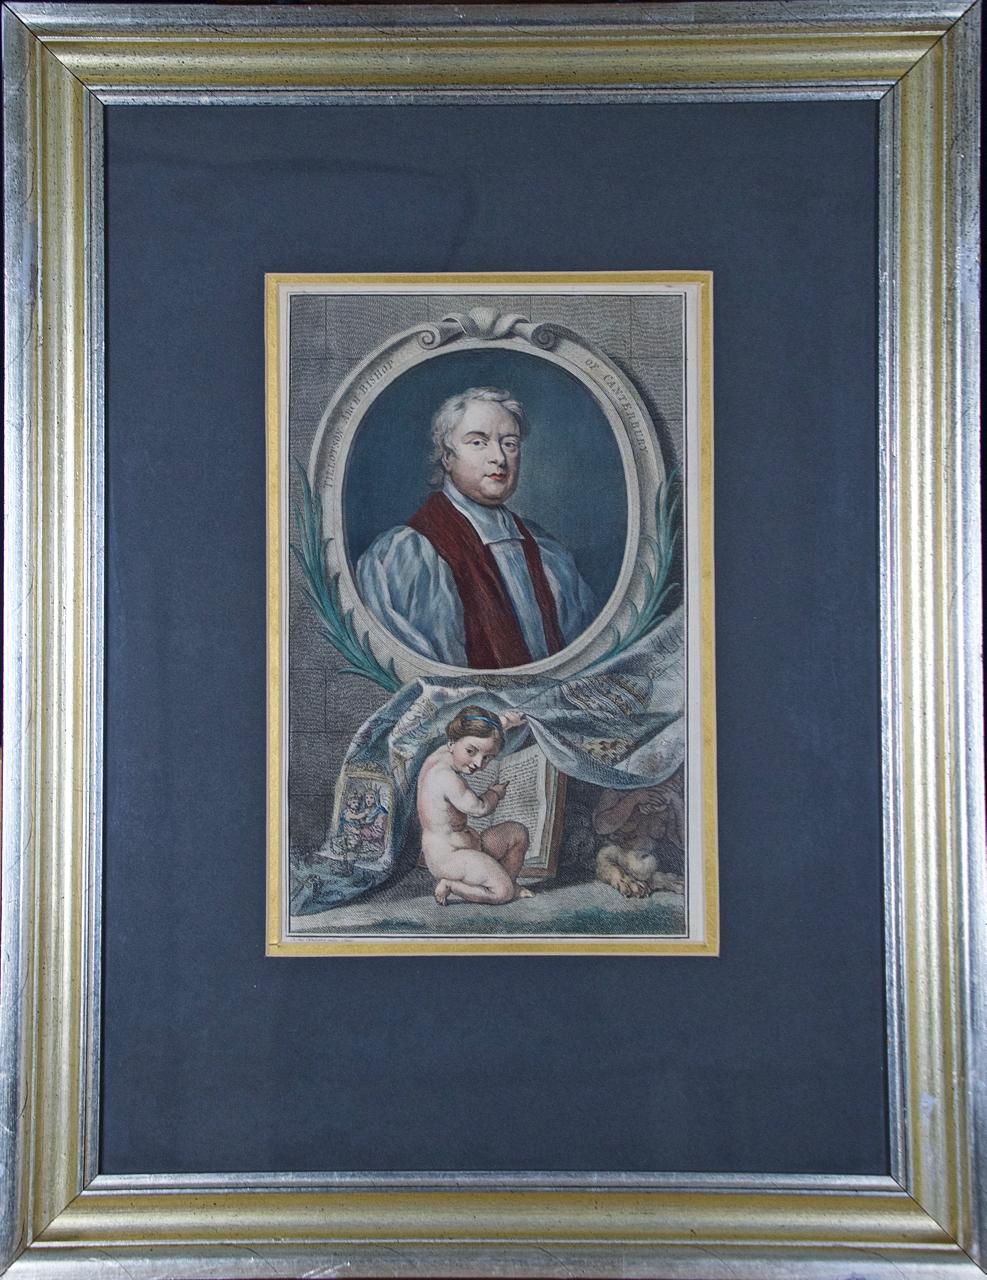 Tillotson, Archbishop of Canterbury: An 18th C. Hand-Colored Portrait by Kneller